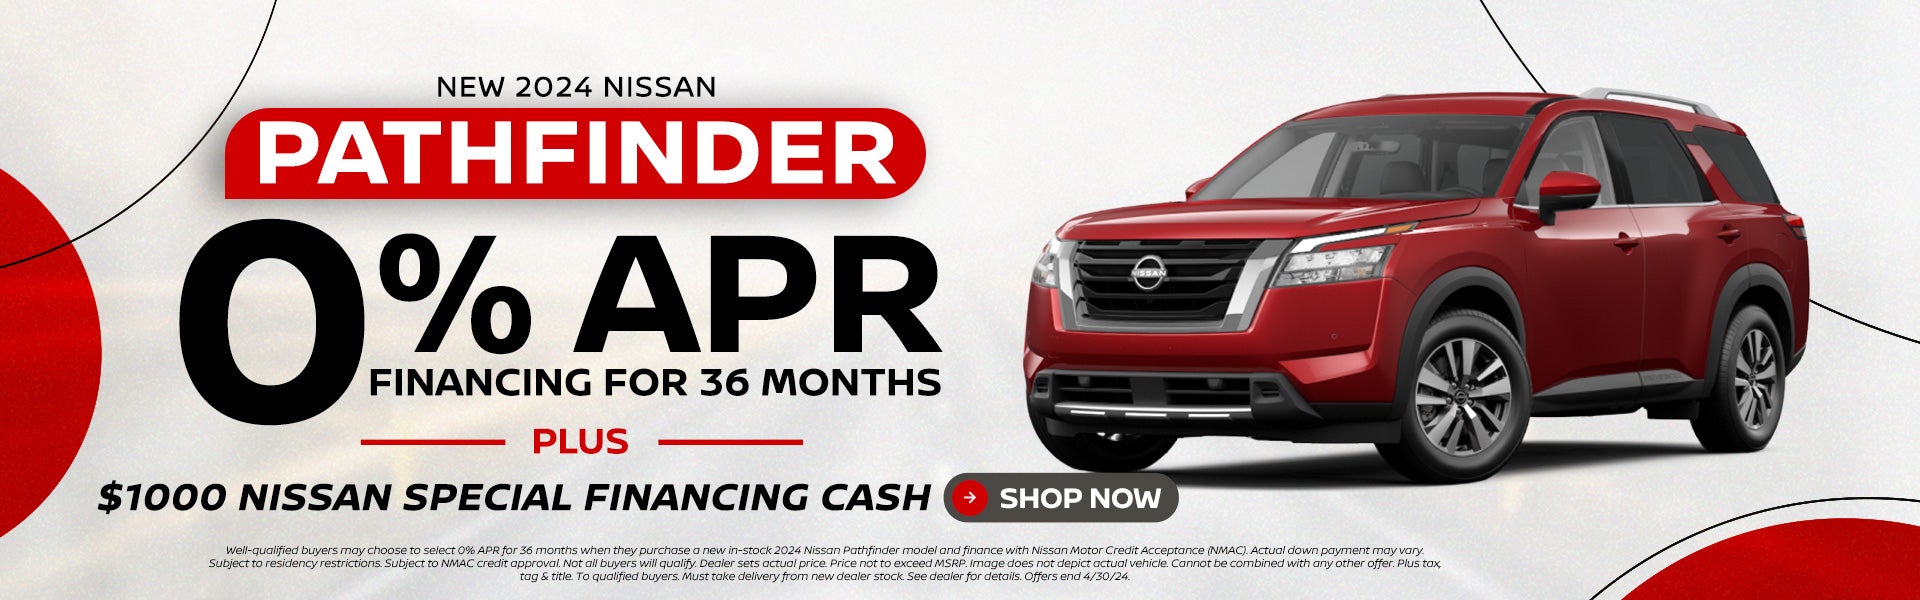 2024 Nissan Pathfinder 0% for 36 Months with $1000 Nissan Ca